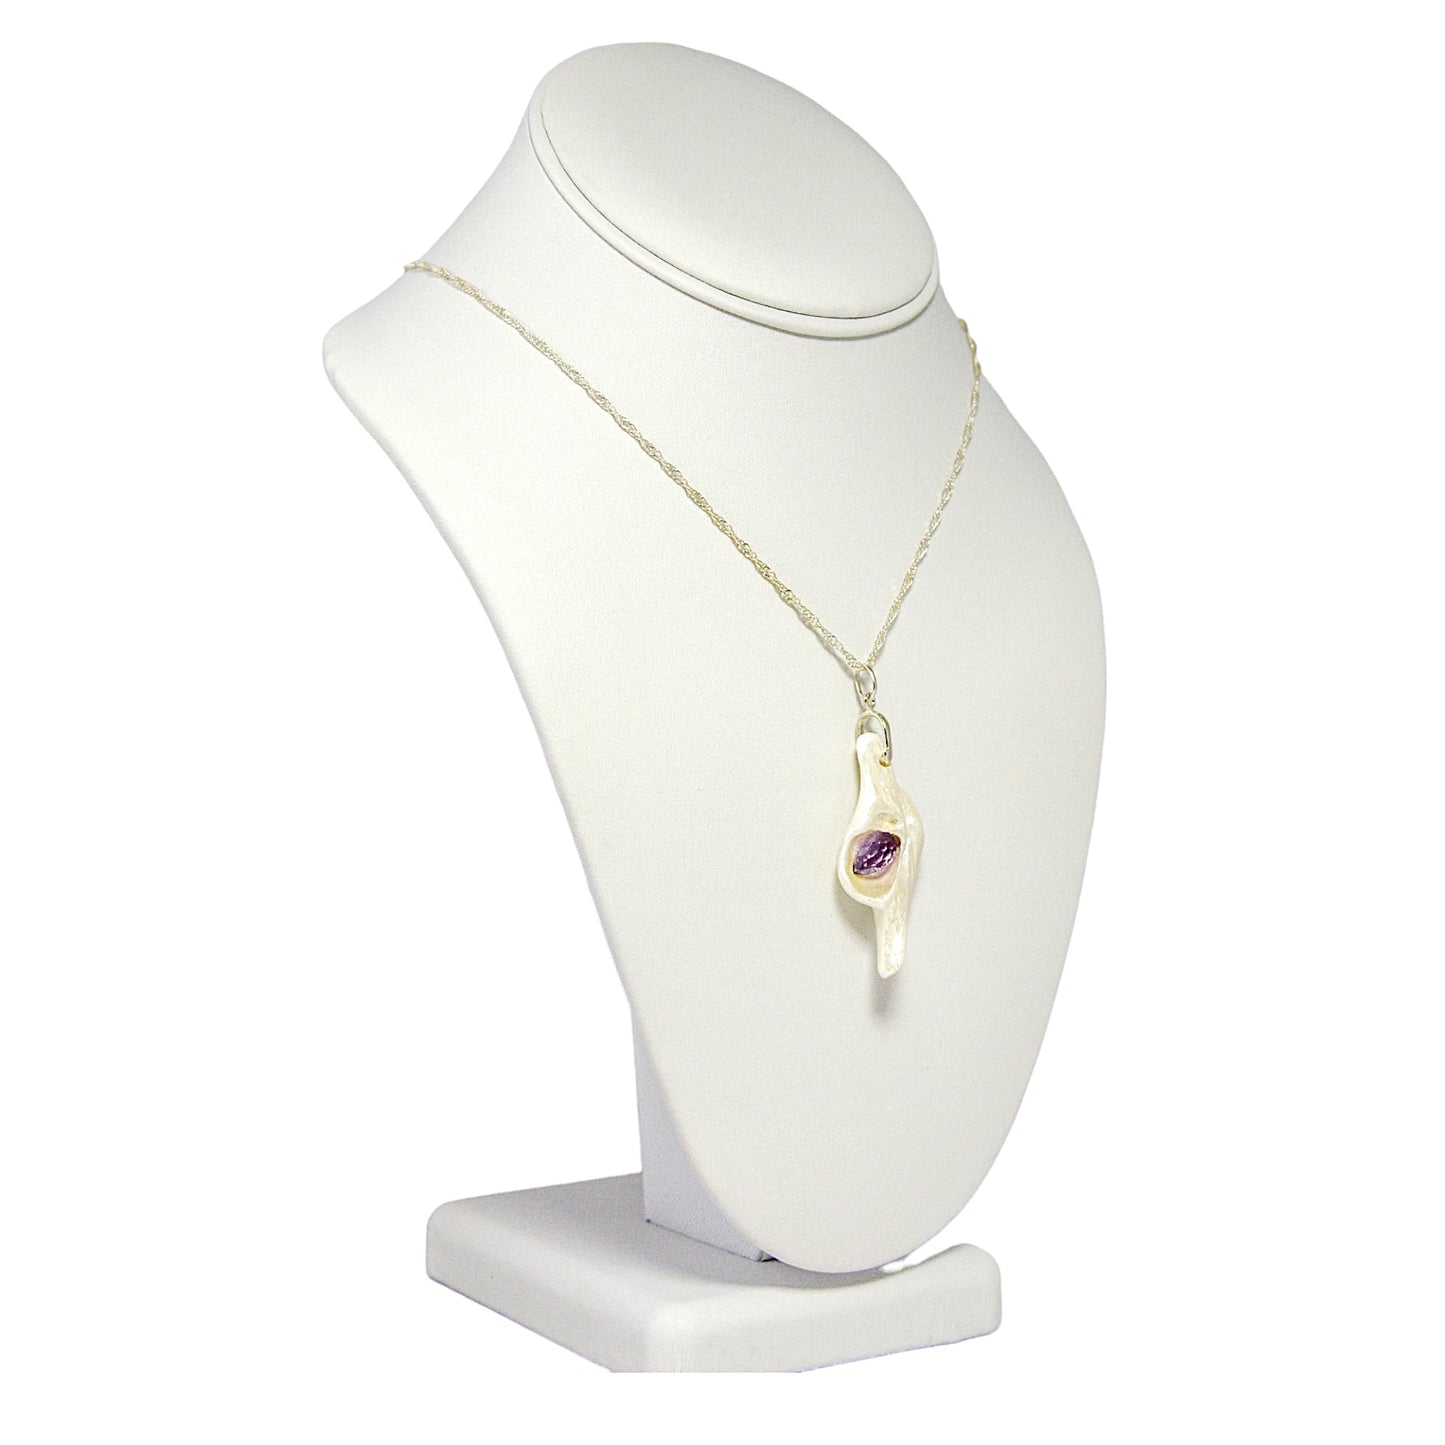 Intuition a natural seashell pendant with a beautiful rose cut marquise Amethyst. The pendant is turned so the viewer can see the right side of the pendant.